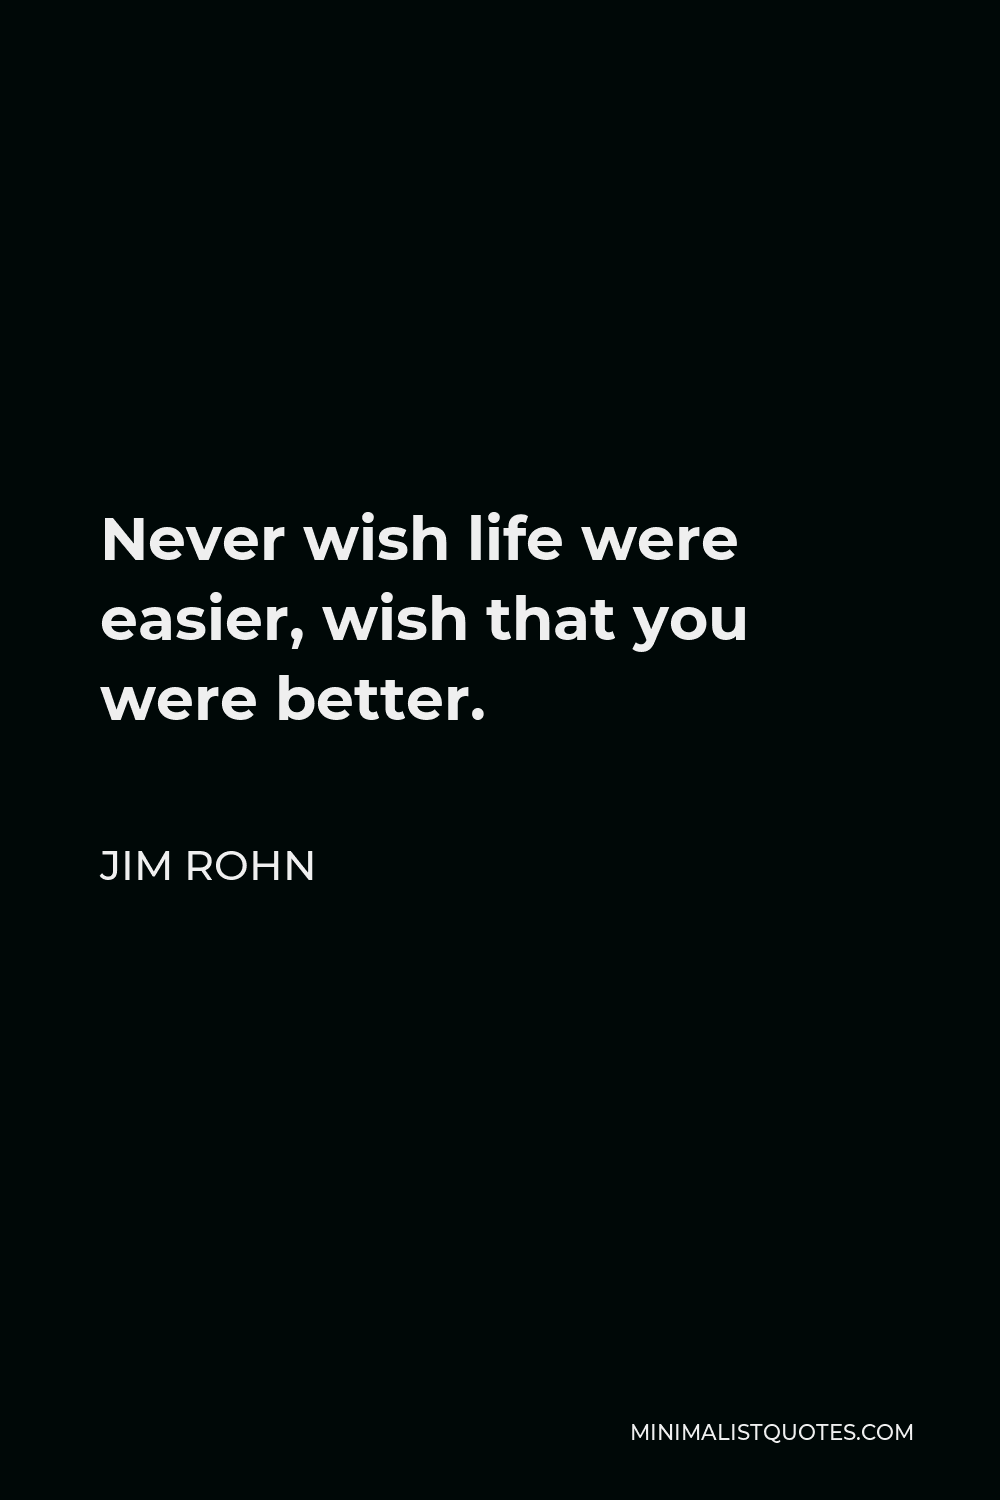 Jim Rohn Quote: Never Wish Life Were Easier, Wish That You Were Better.